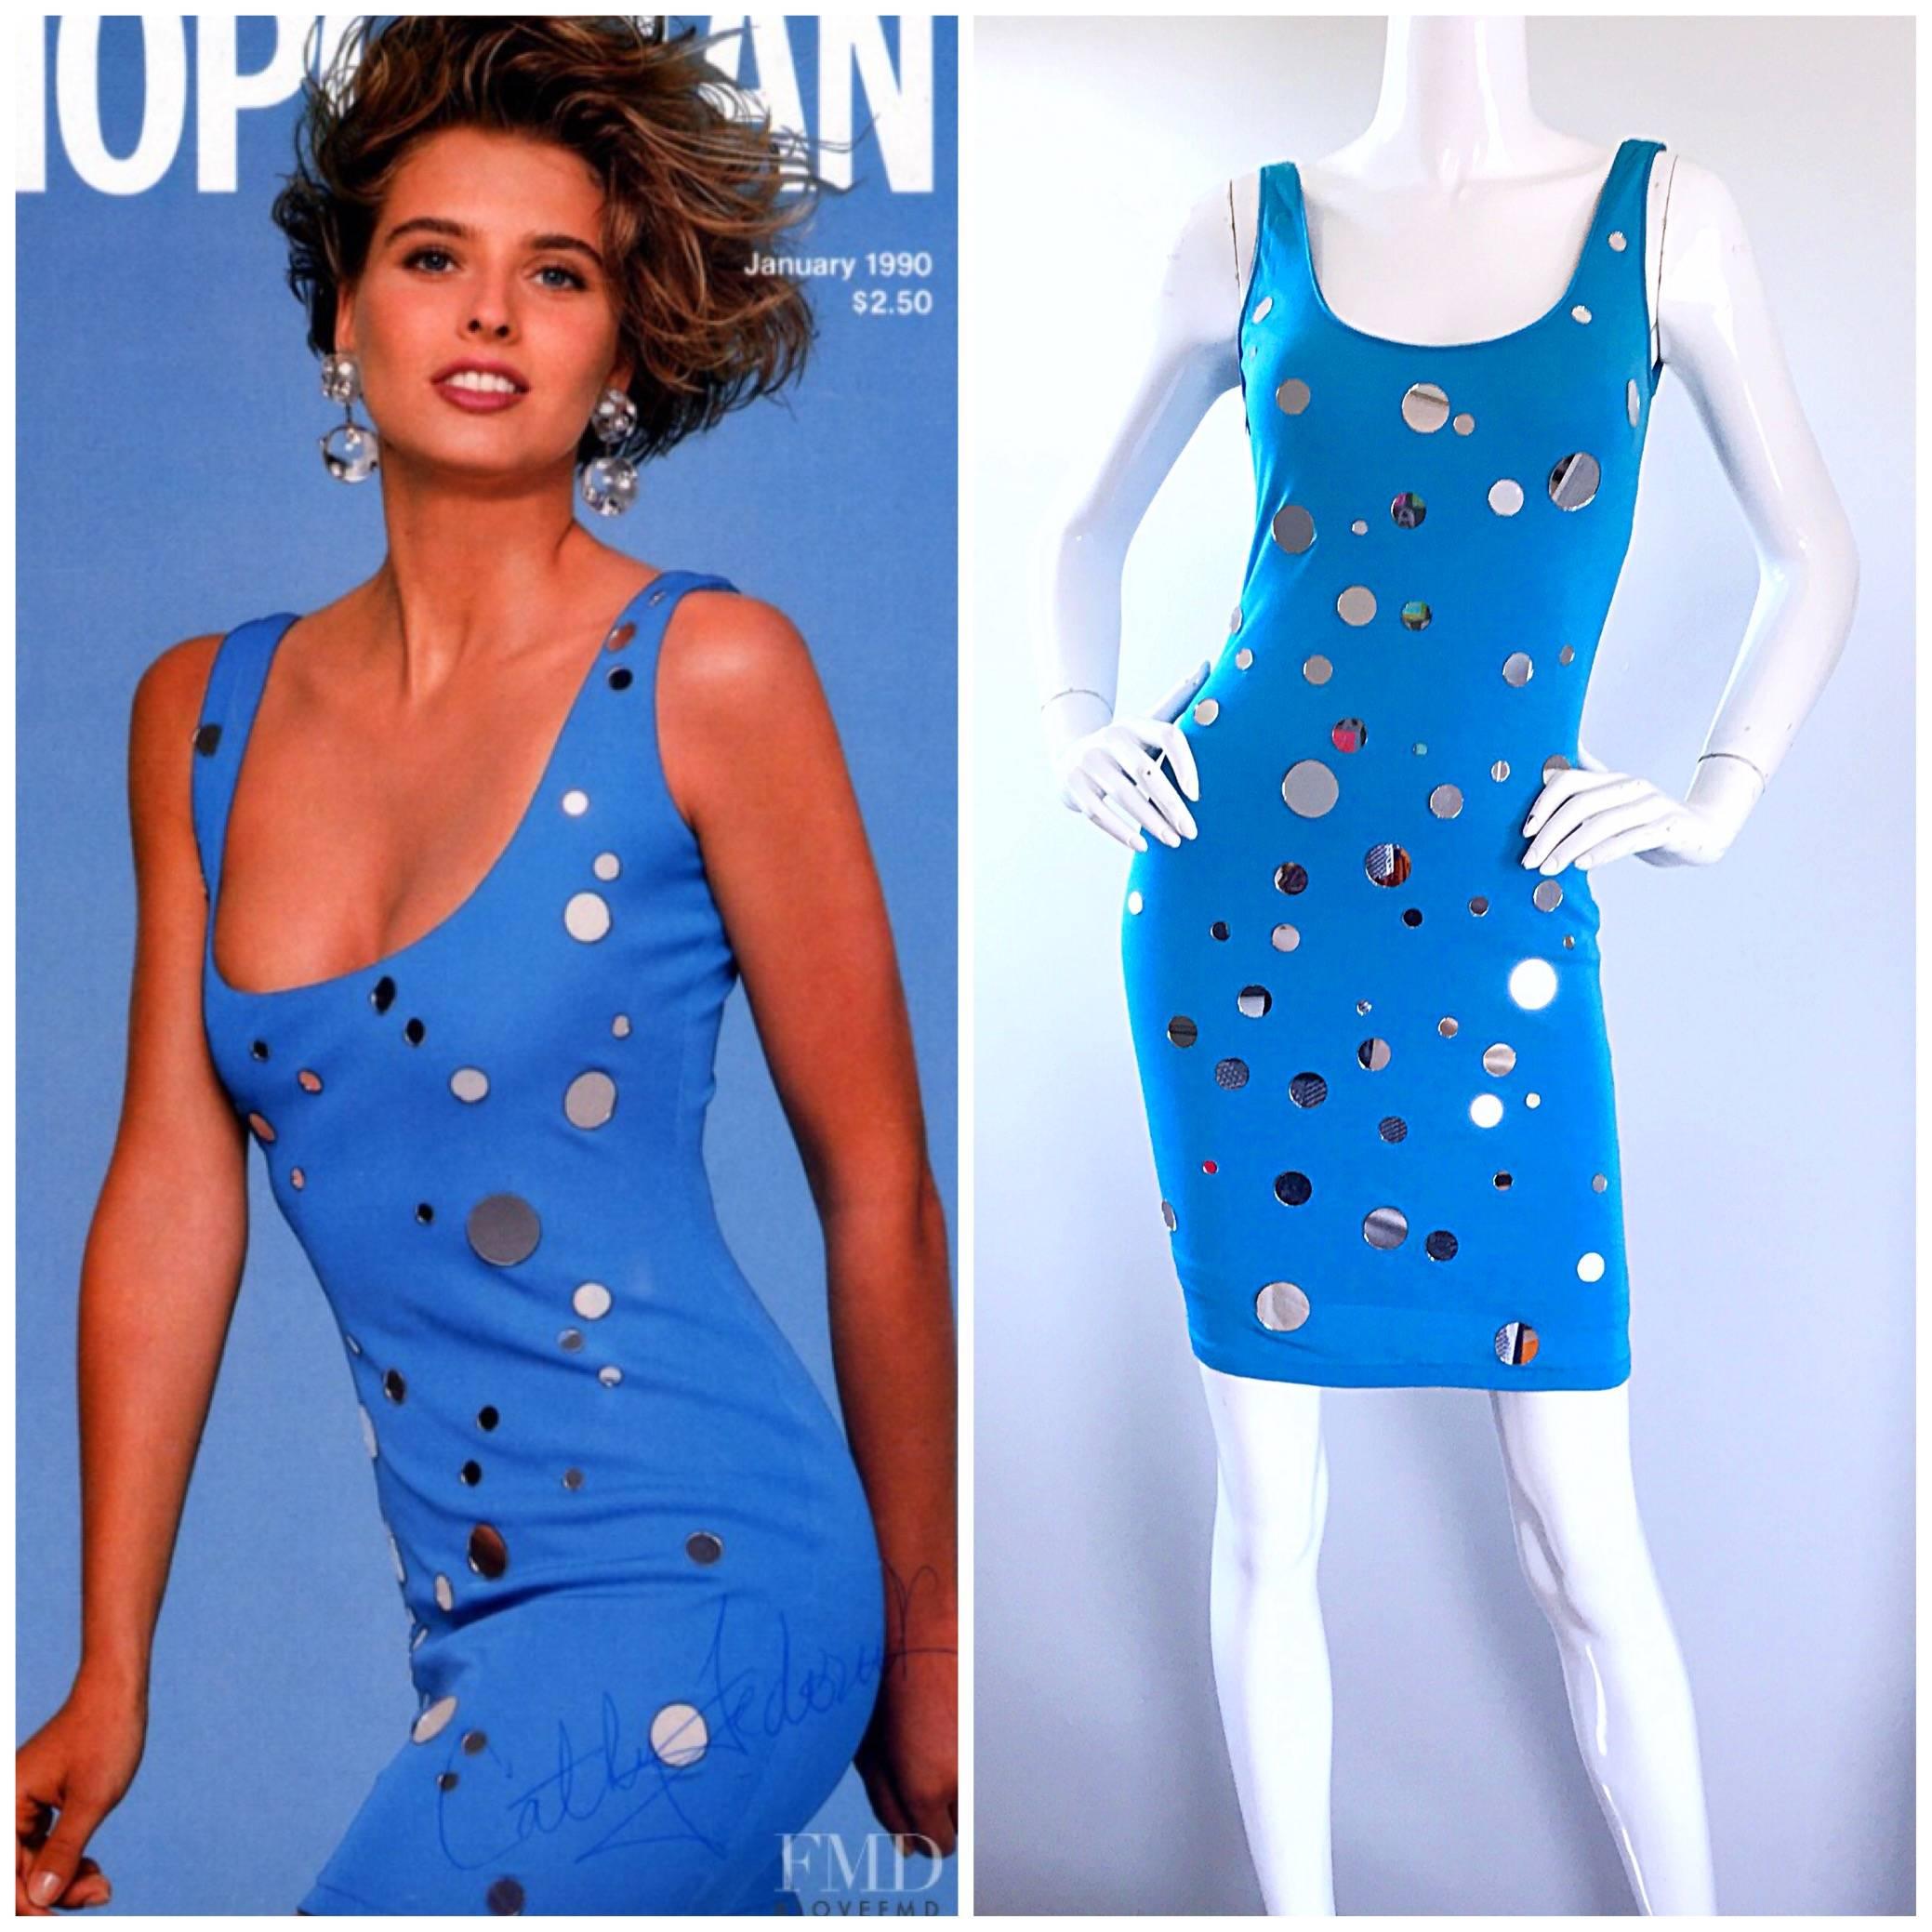 Sexy documented early 1990s / 90s C.D. Greene turquoise blue mirrored stretch jersey bodcon dress! Features dozens of various sized mirrors throughout the front. Photographed on supermodel Cathy Fedoruk on the January 1990s cover of, "